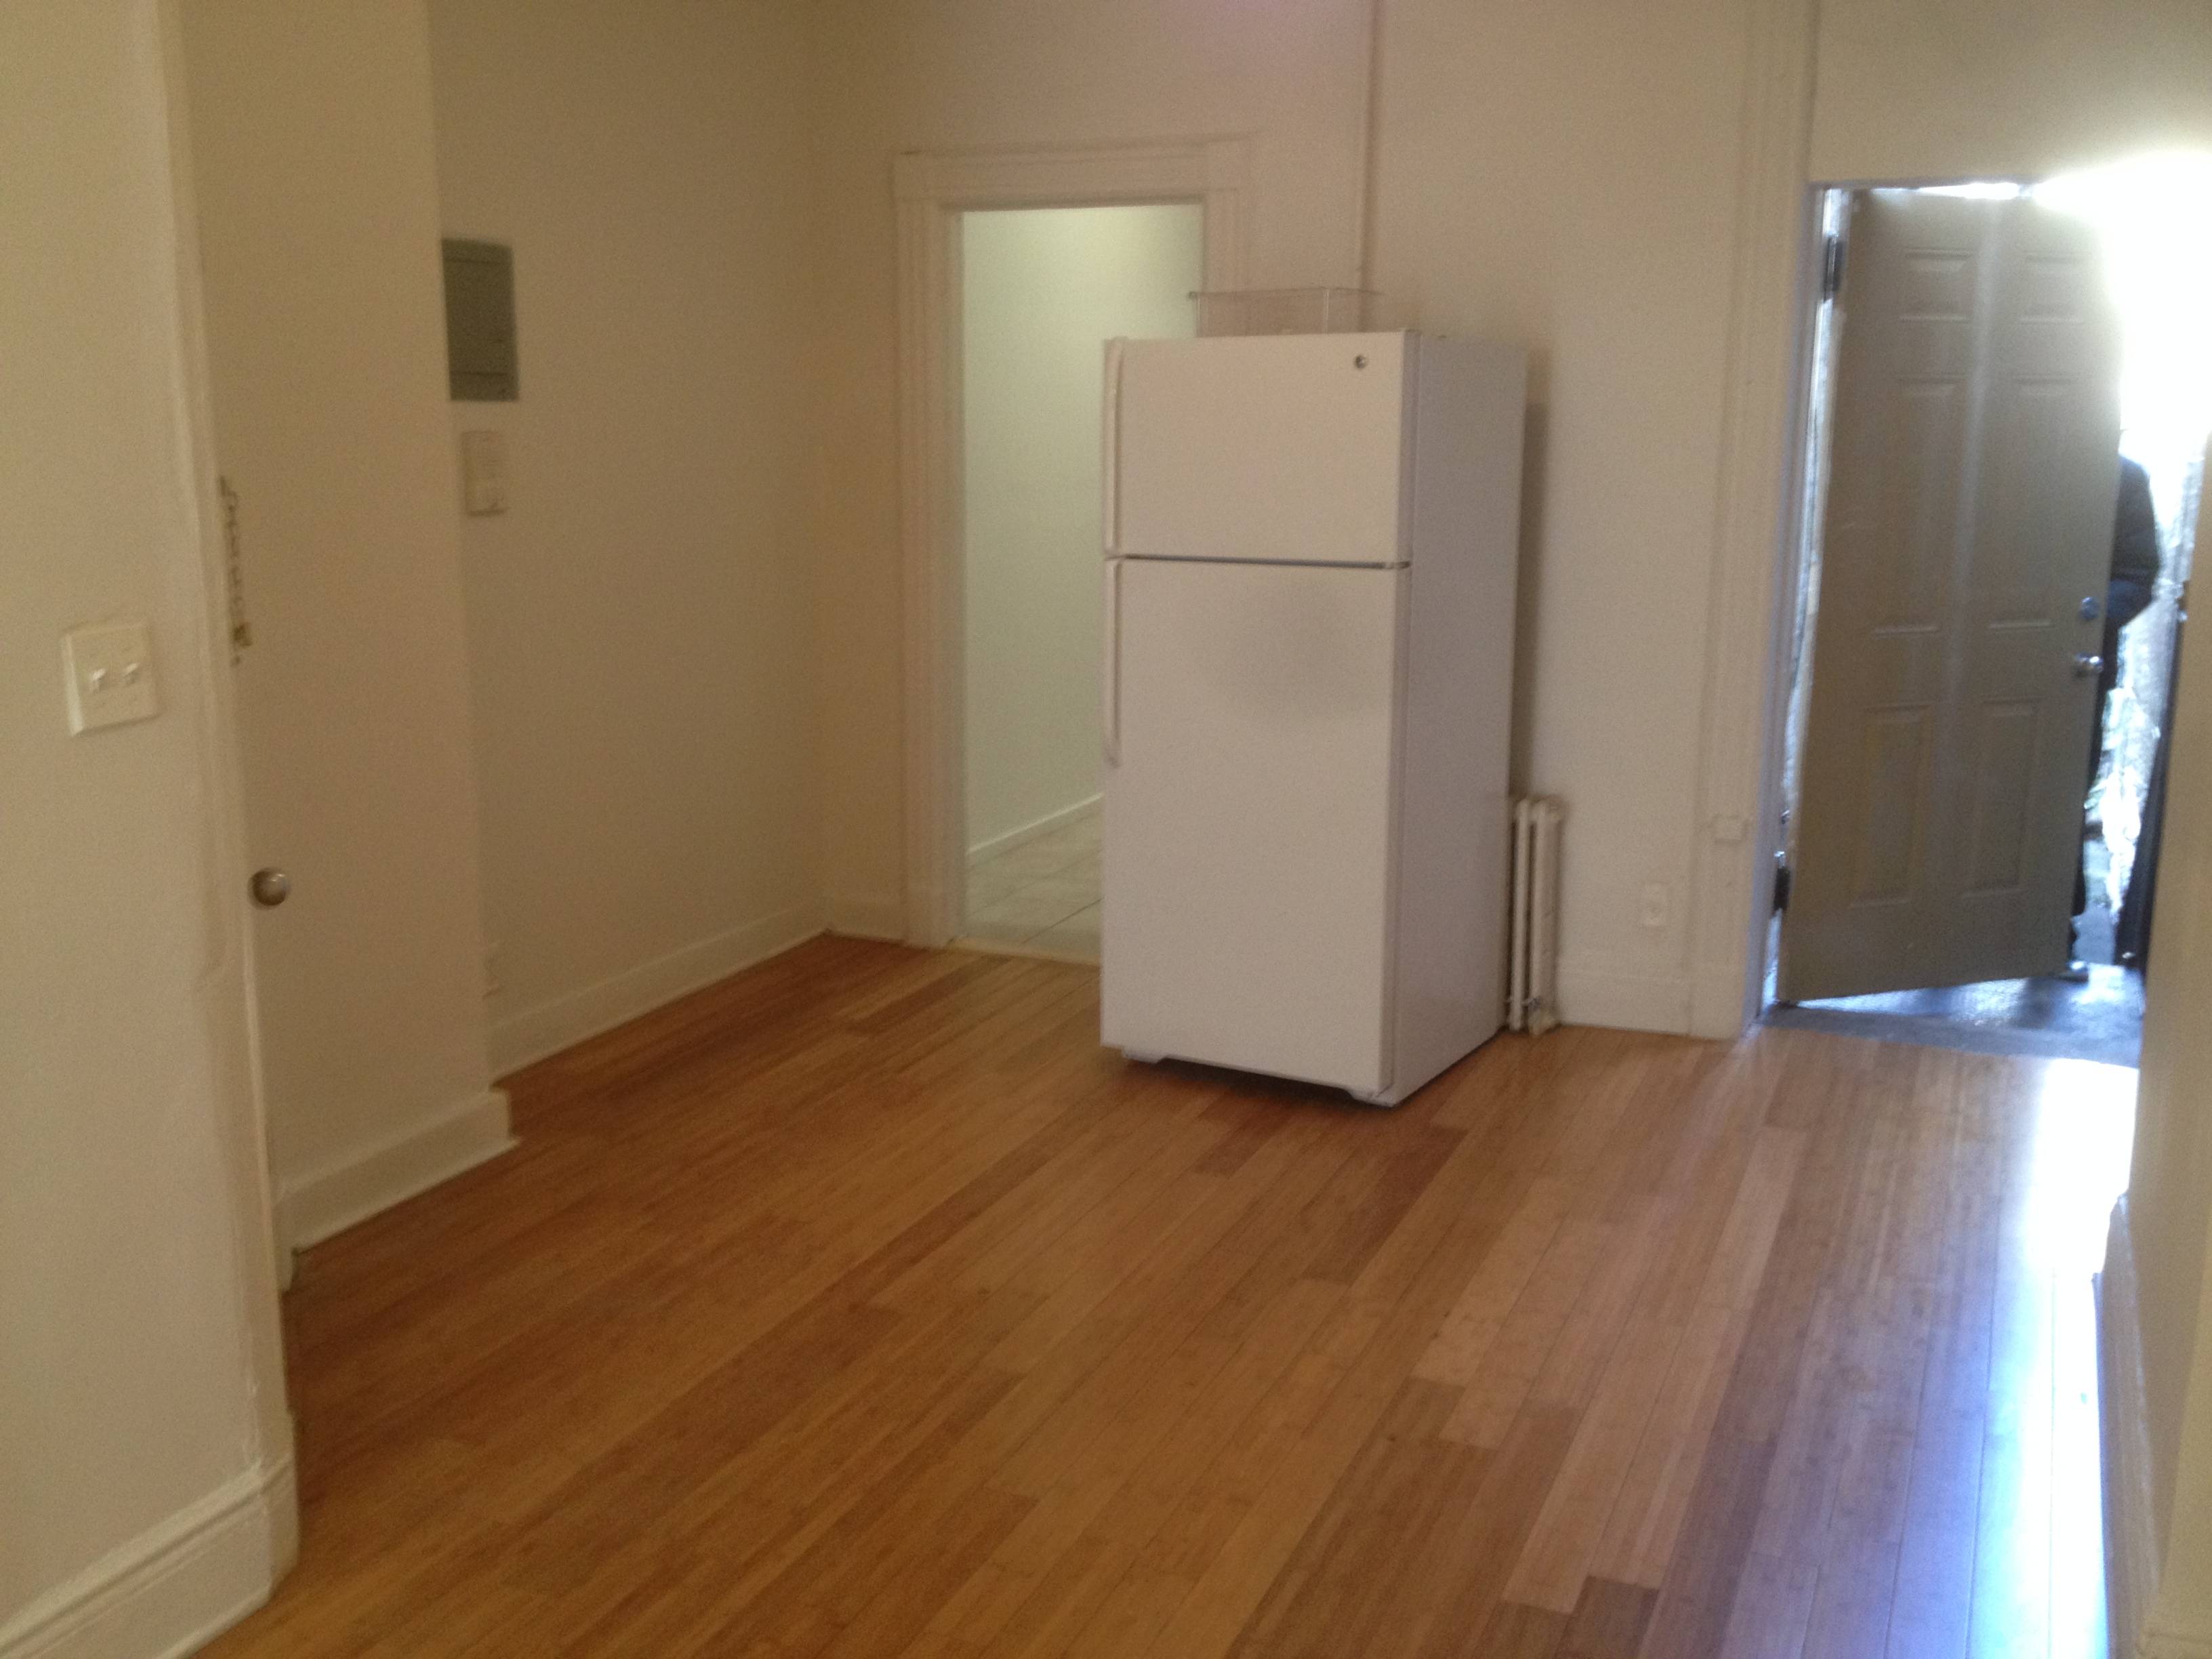 Amazing 2 Bedroom Apartment with Private Outdoor Space, Right by Myrtle-Wyckoff L & M Train Station!!!